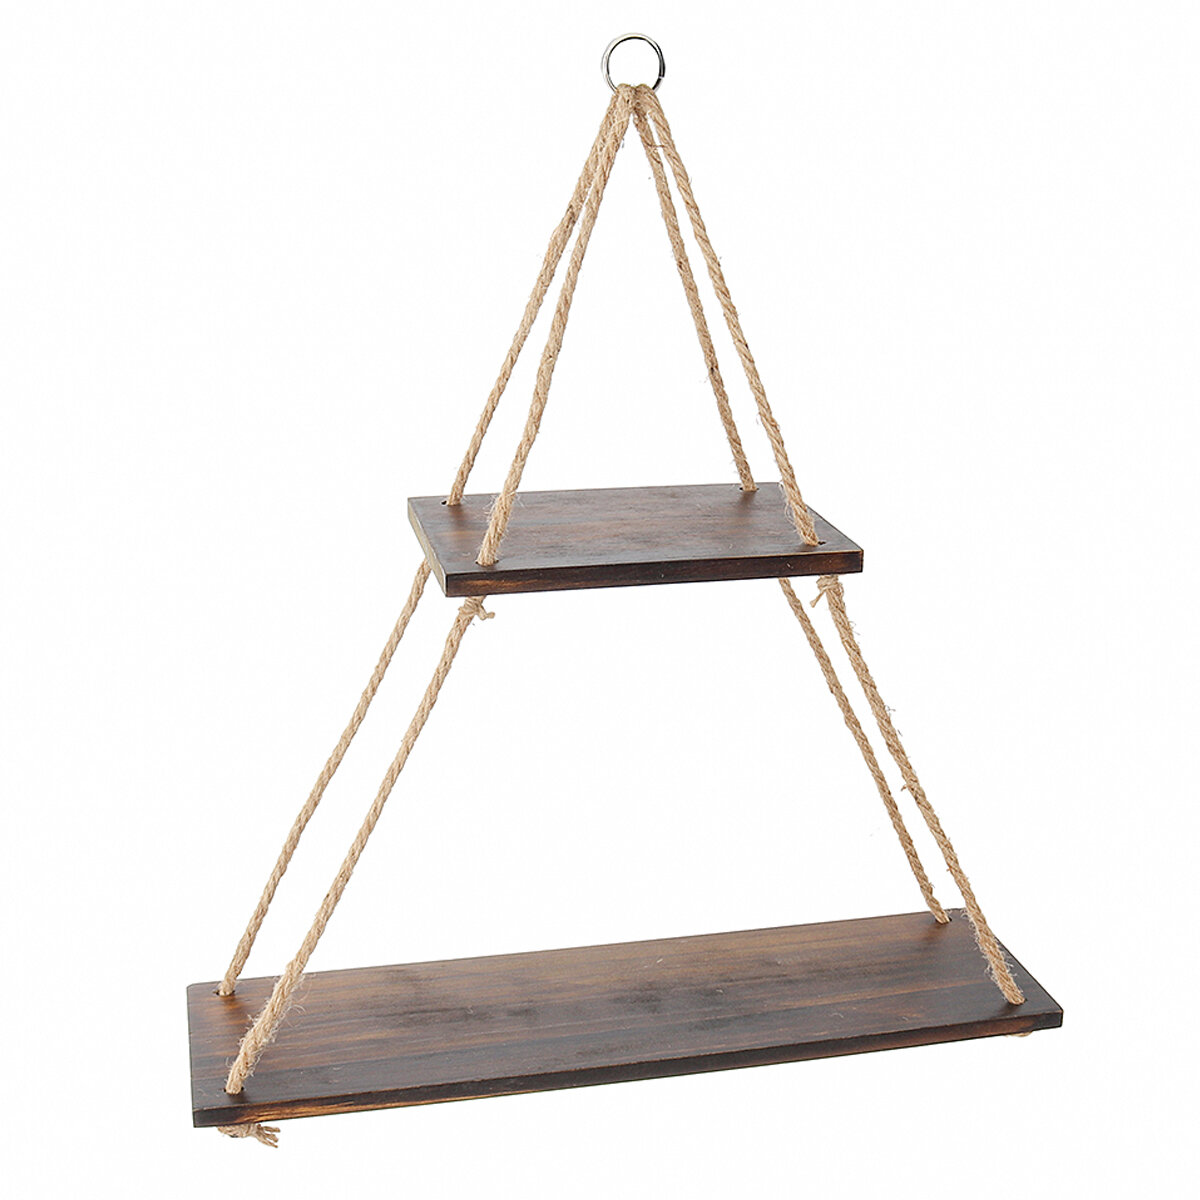 2 Layers Wooden Wall Floating Shelves Hanging Rope Swing Flower Pot Storage Rack Shelf Home Wall Dec